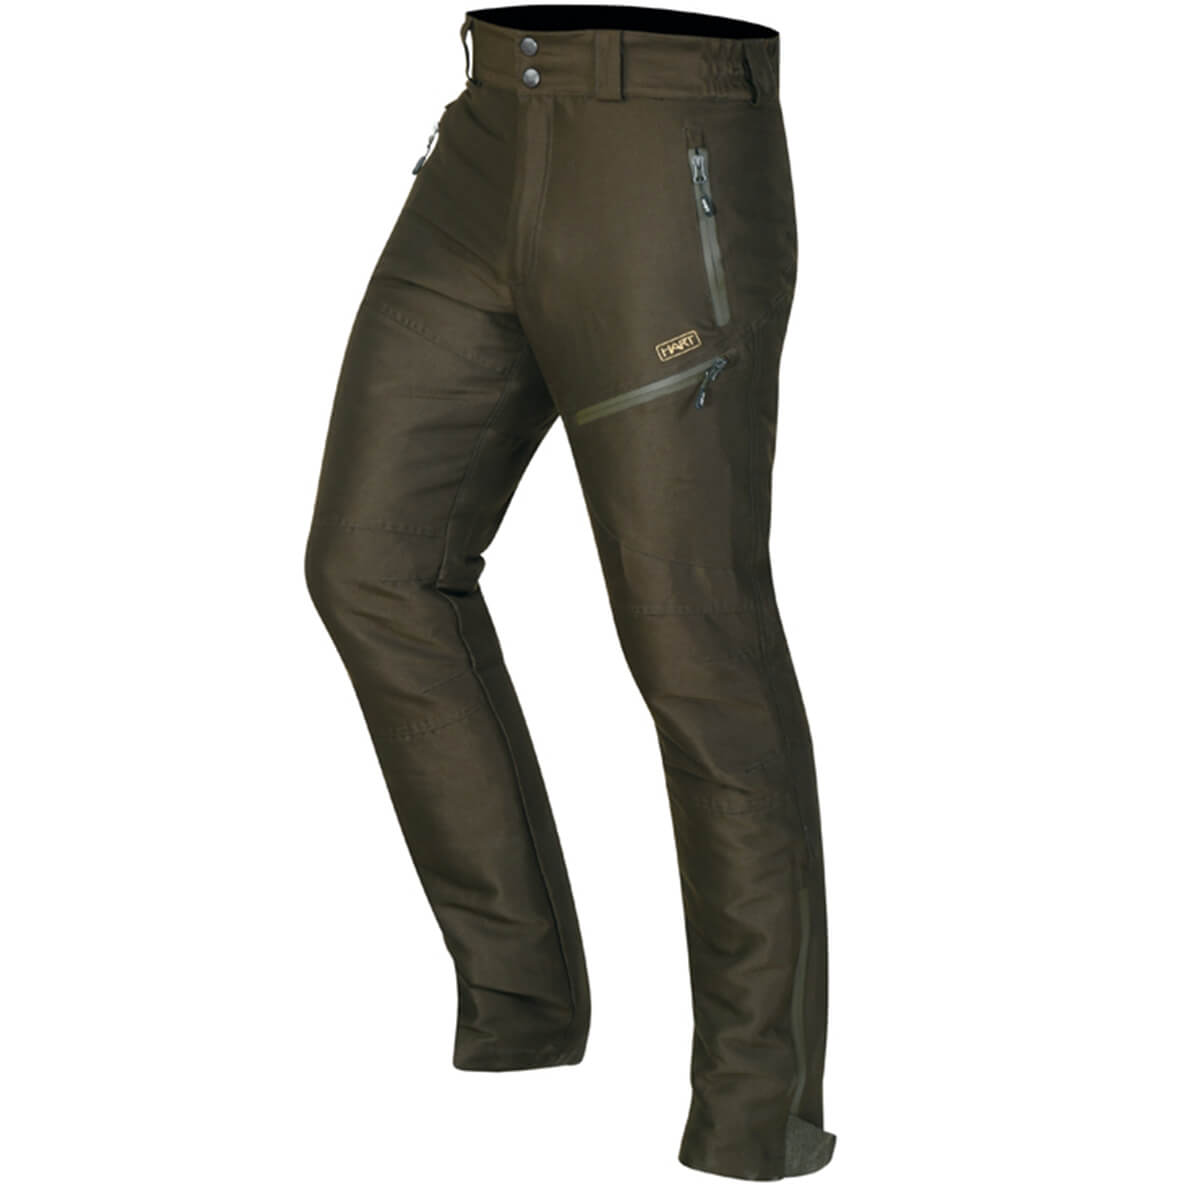 Hart winter trousers Altai-T